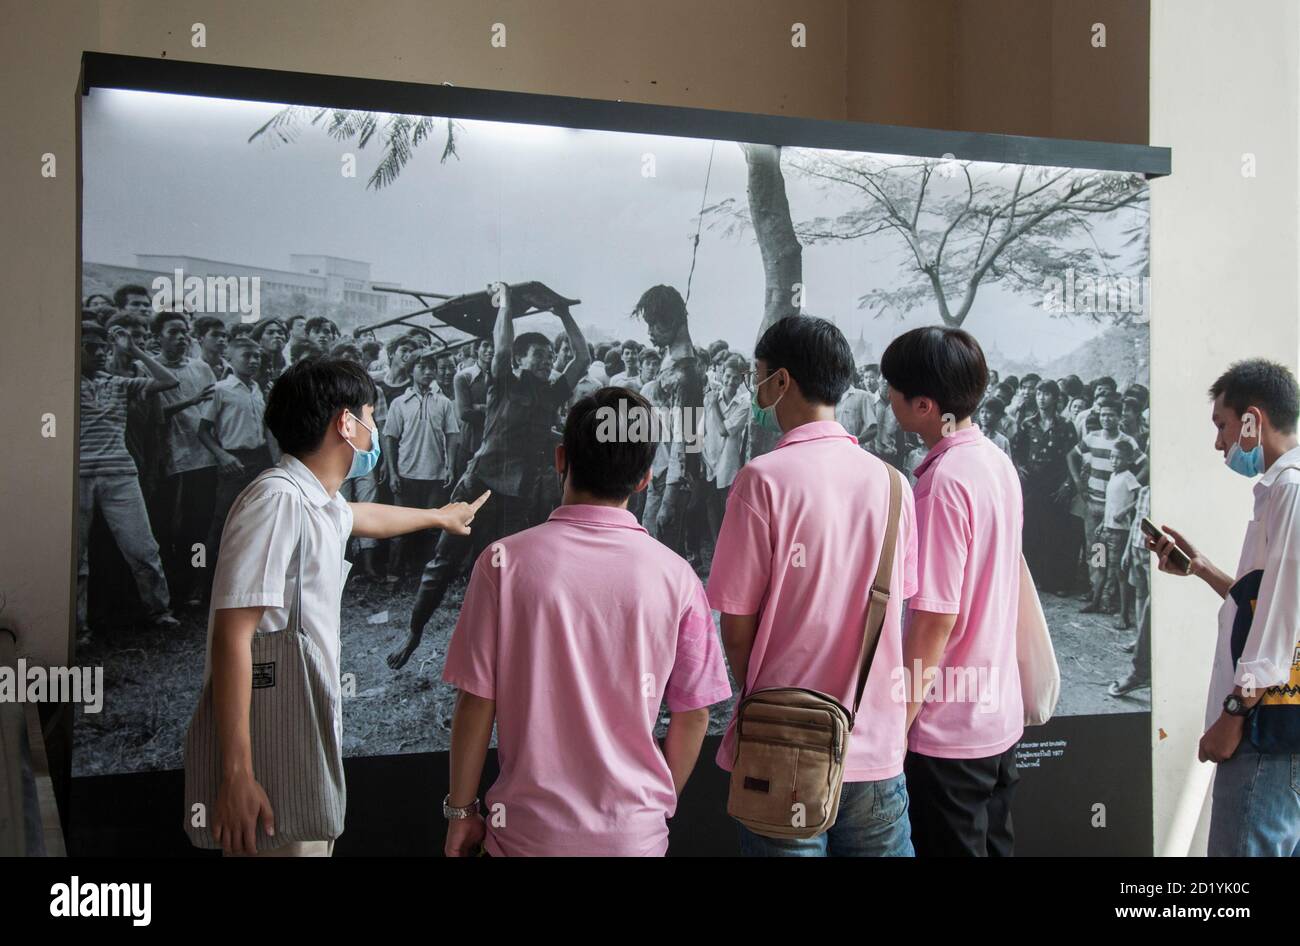 A group of students attend an exhibition during the 44th anniversary of the Thammasat massacre.The 6 October 1976 Thammasat University massacre was a violent crackdown by Thai police joined with right-wing paramilitaries against leftist protesters and students who had occupied Bangkok's Thammasat University. Stock Photo